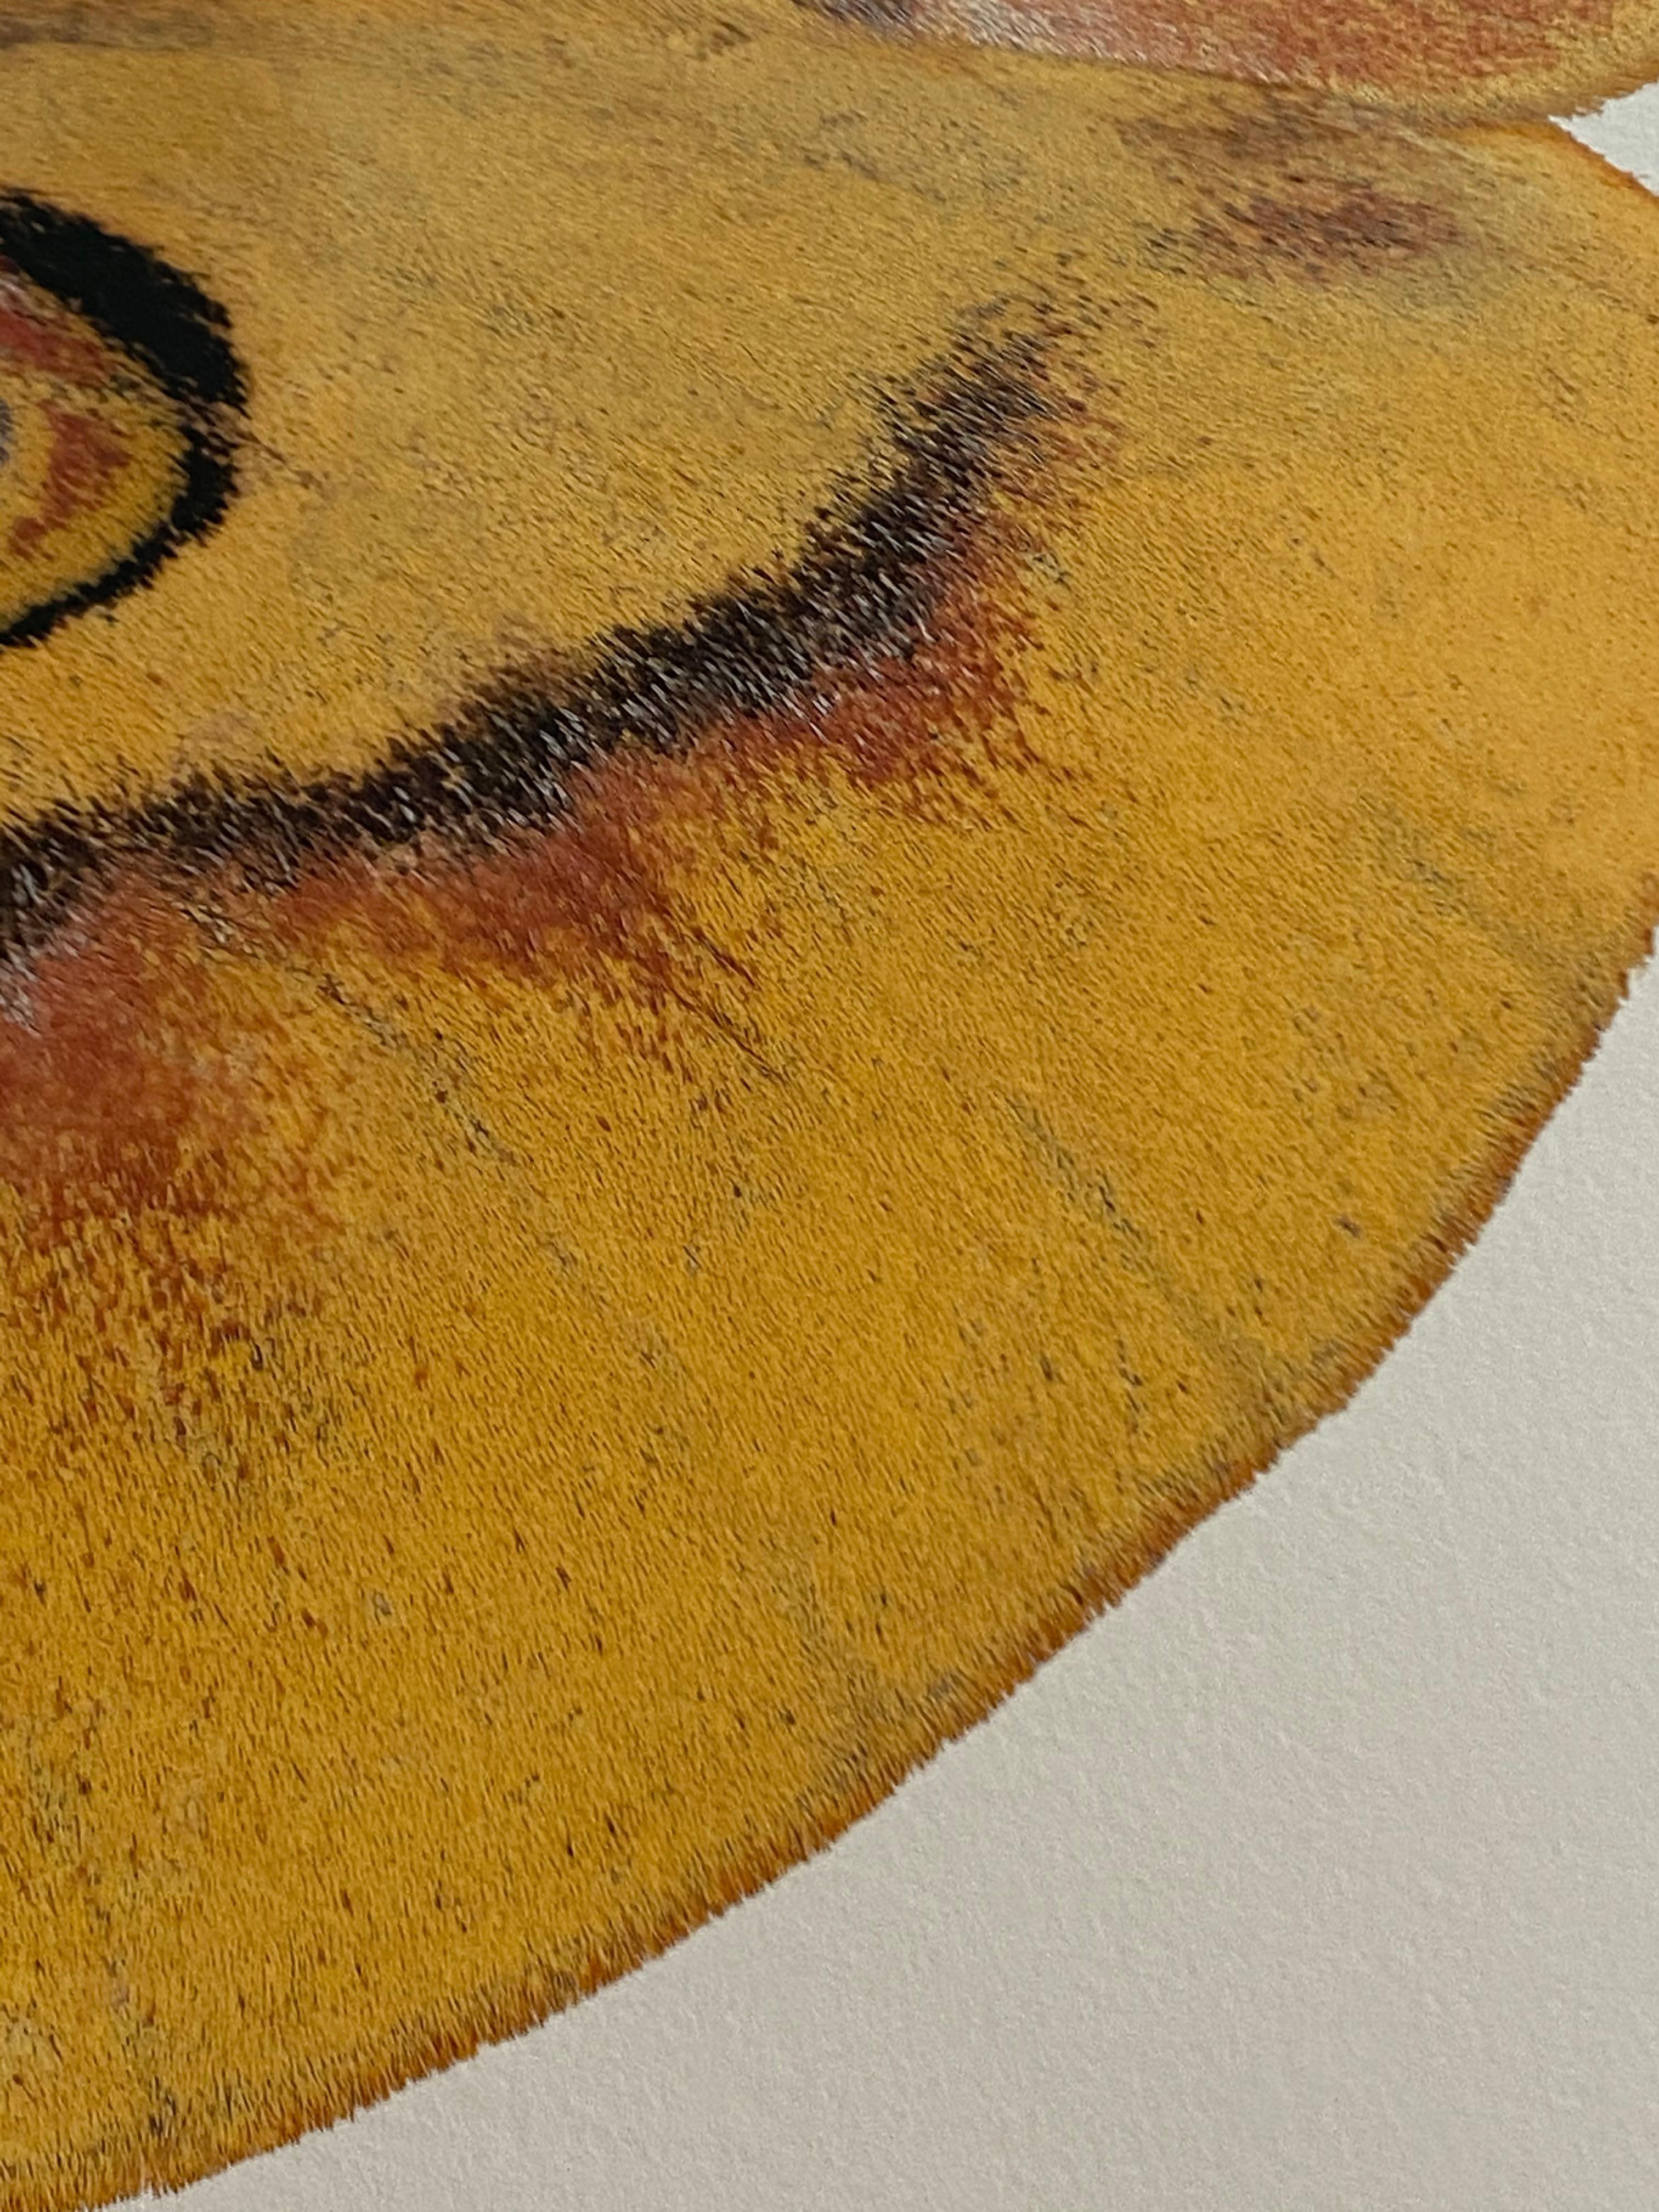 In this hyper-detailed archival pigment print on watercolor paper, a yellow moth with light brown and reddish coral markings is dramatic against a clean, solid white background. 

Price shown is the unframed price. Please inquire with the gallery